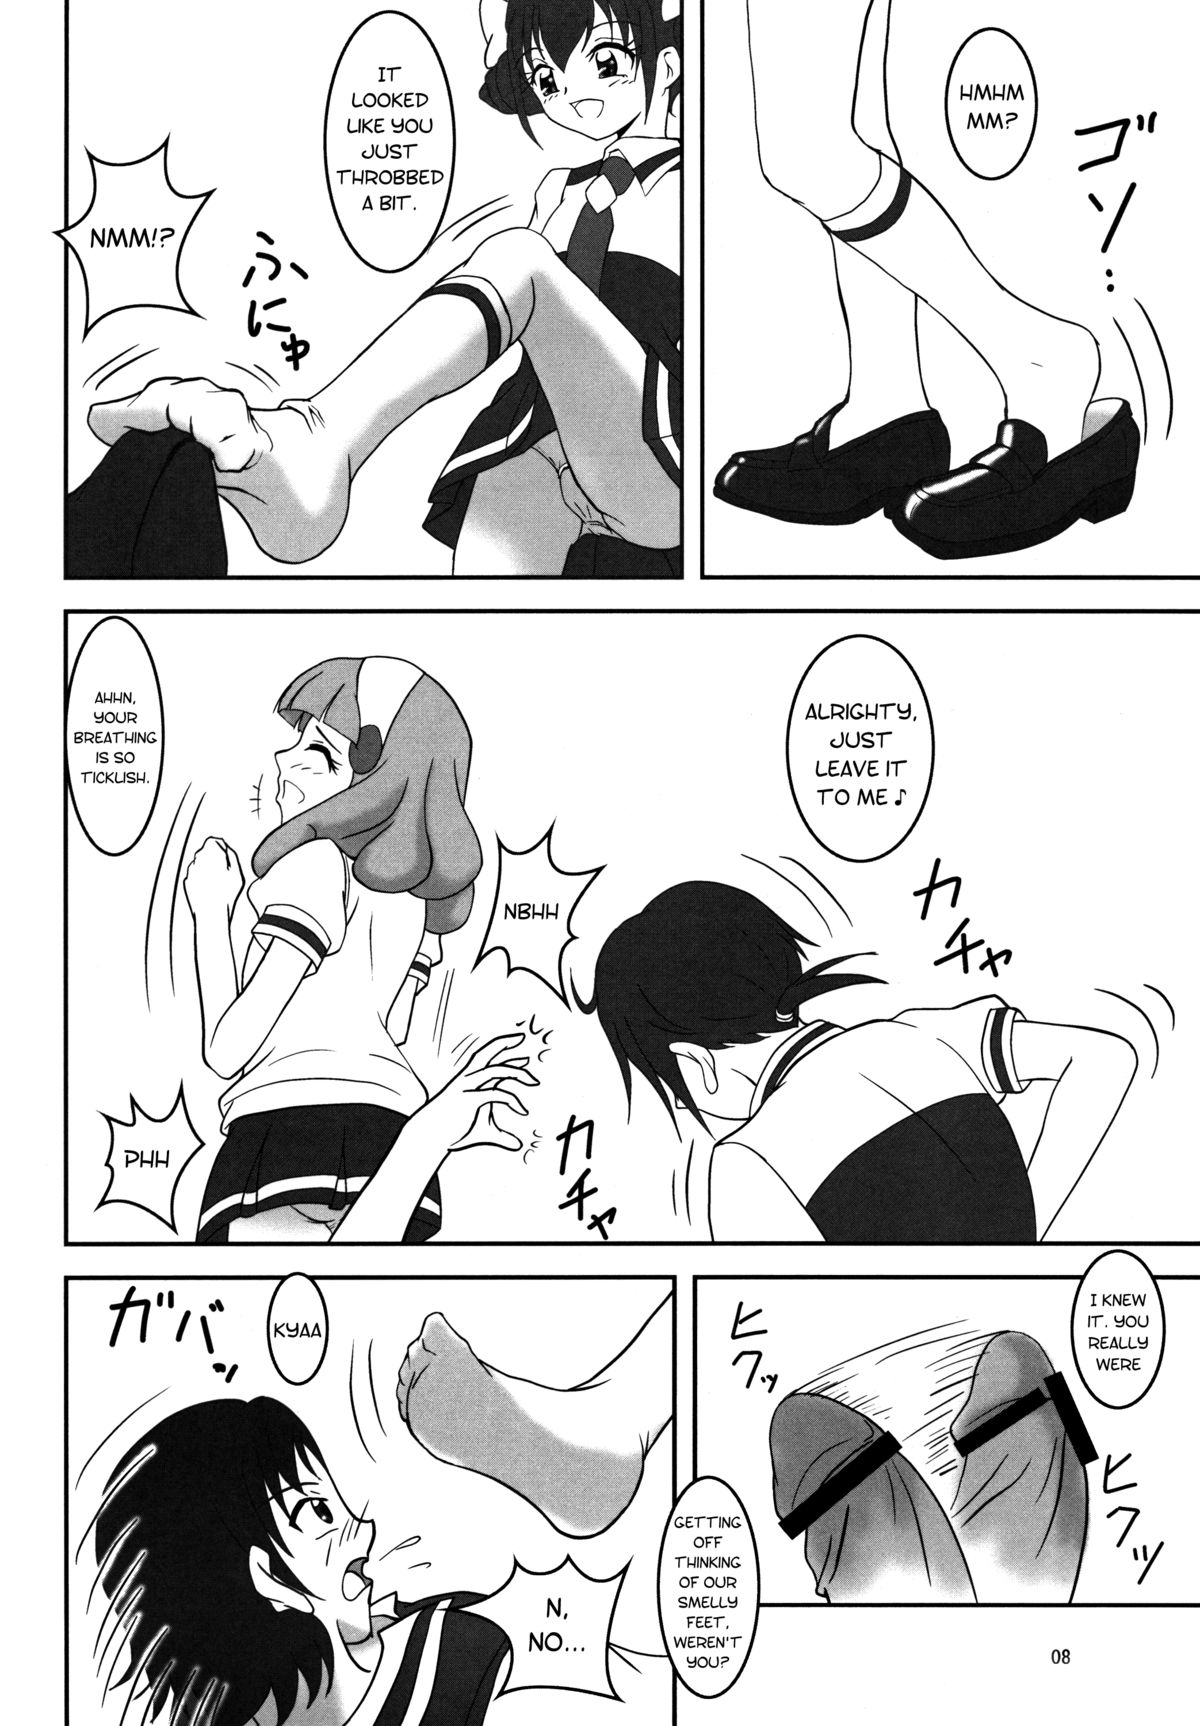 (C82) [AFJ (Ashi_O)] Smell Zuricure | Smell Footycure (Smile Precure!) [English] page 9 full